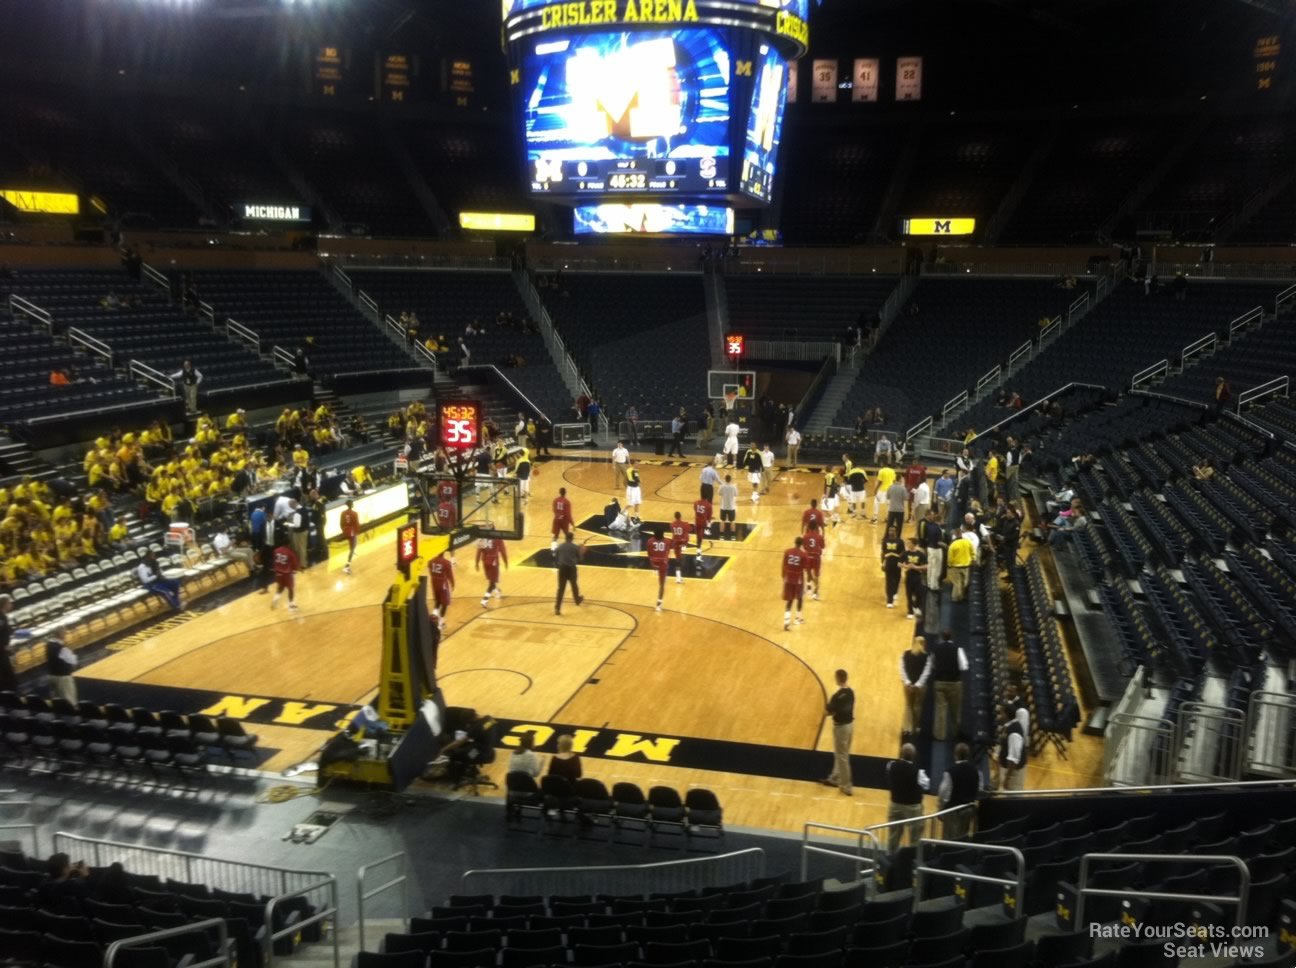 section 112, row 16 seat view  - crisler center